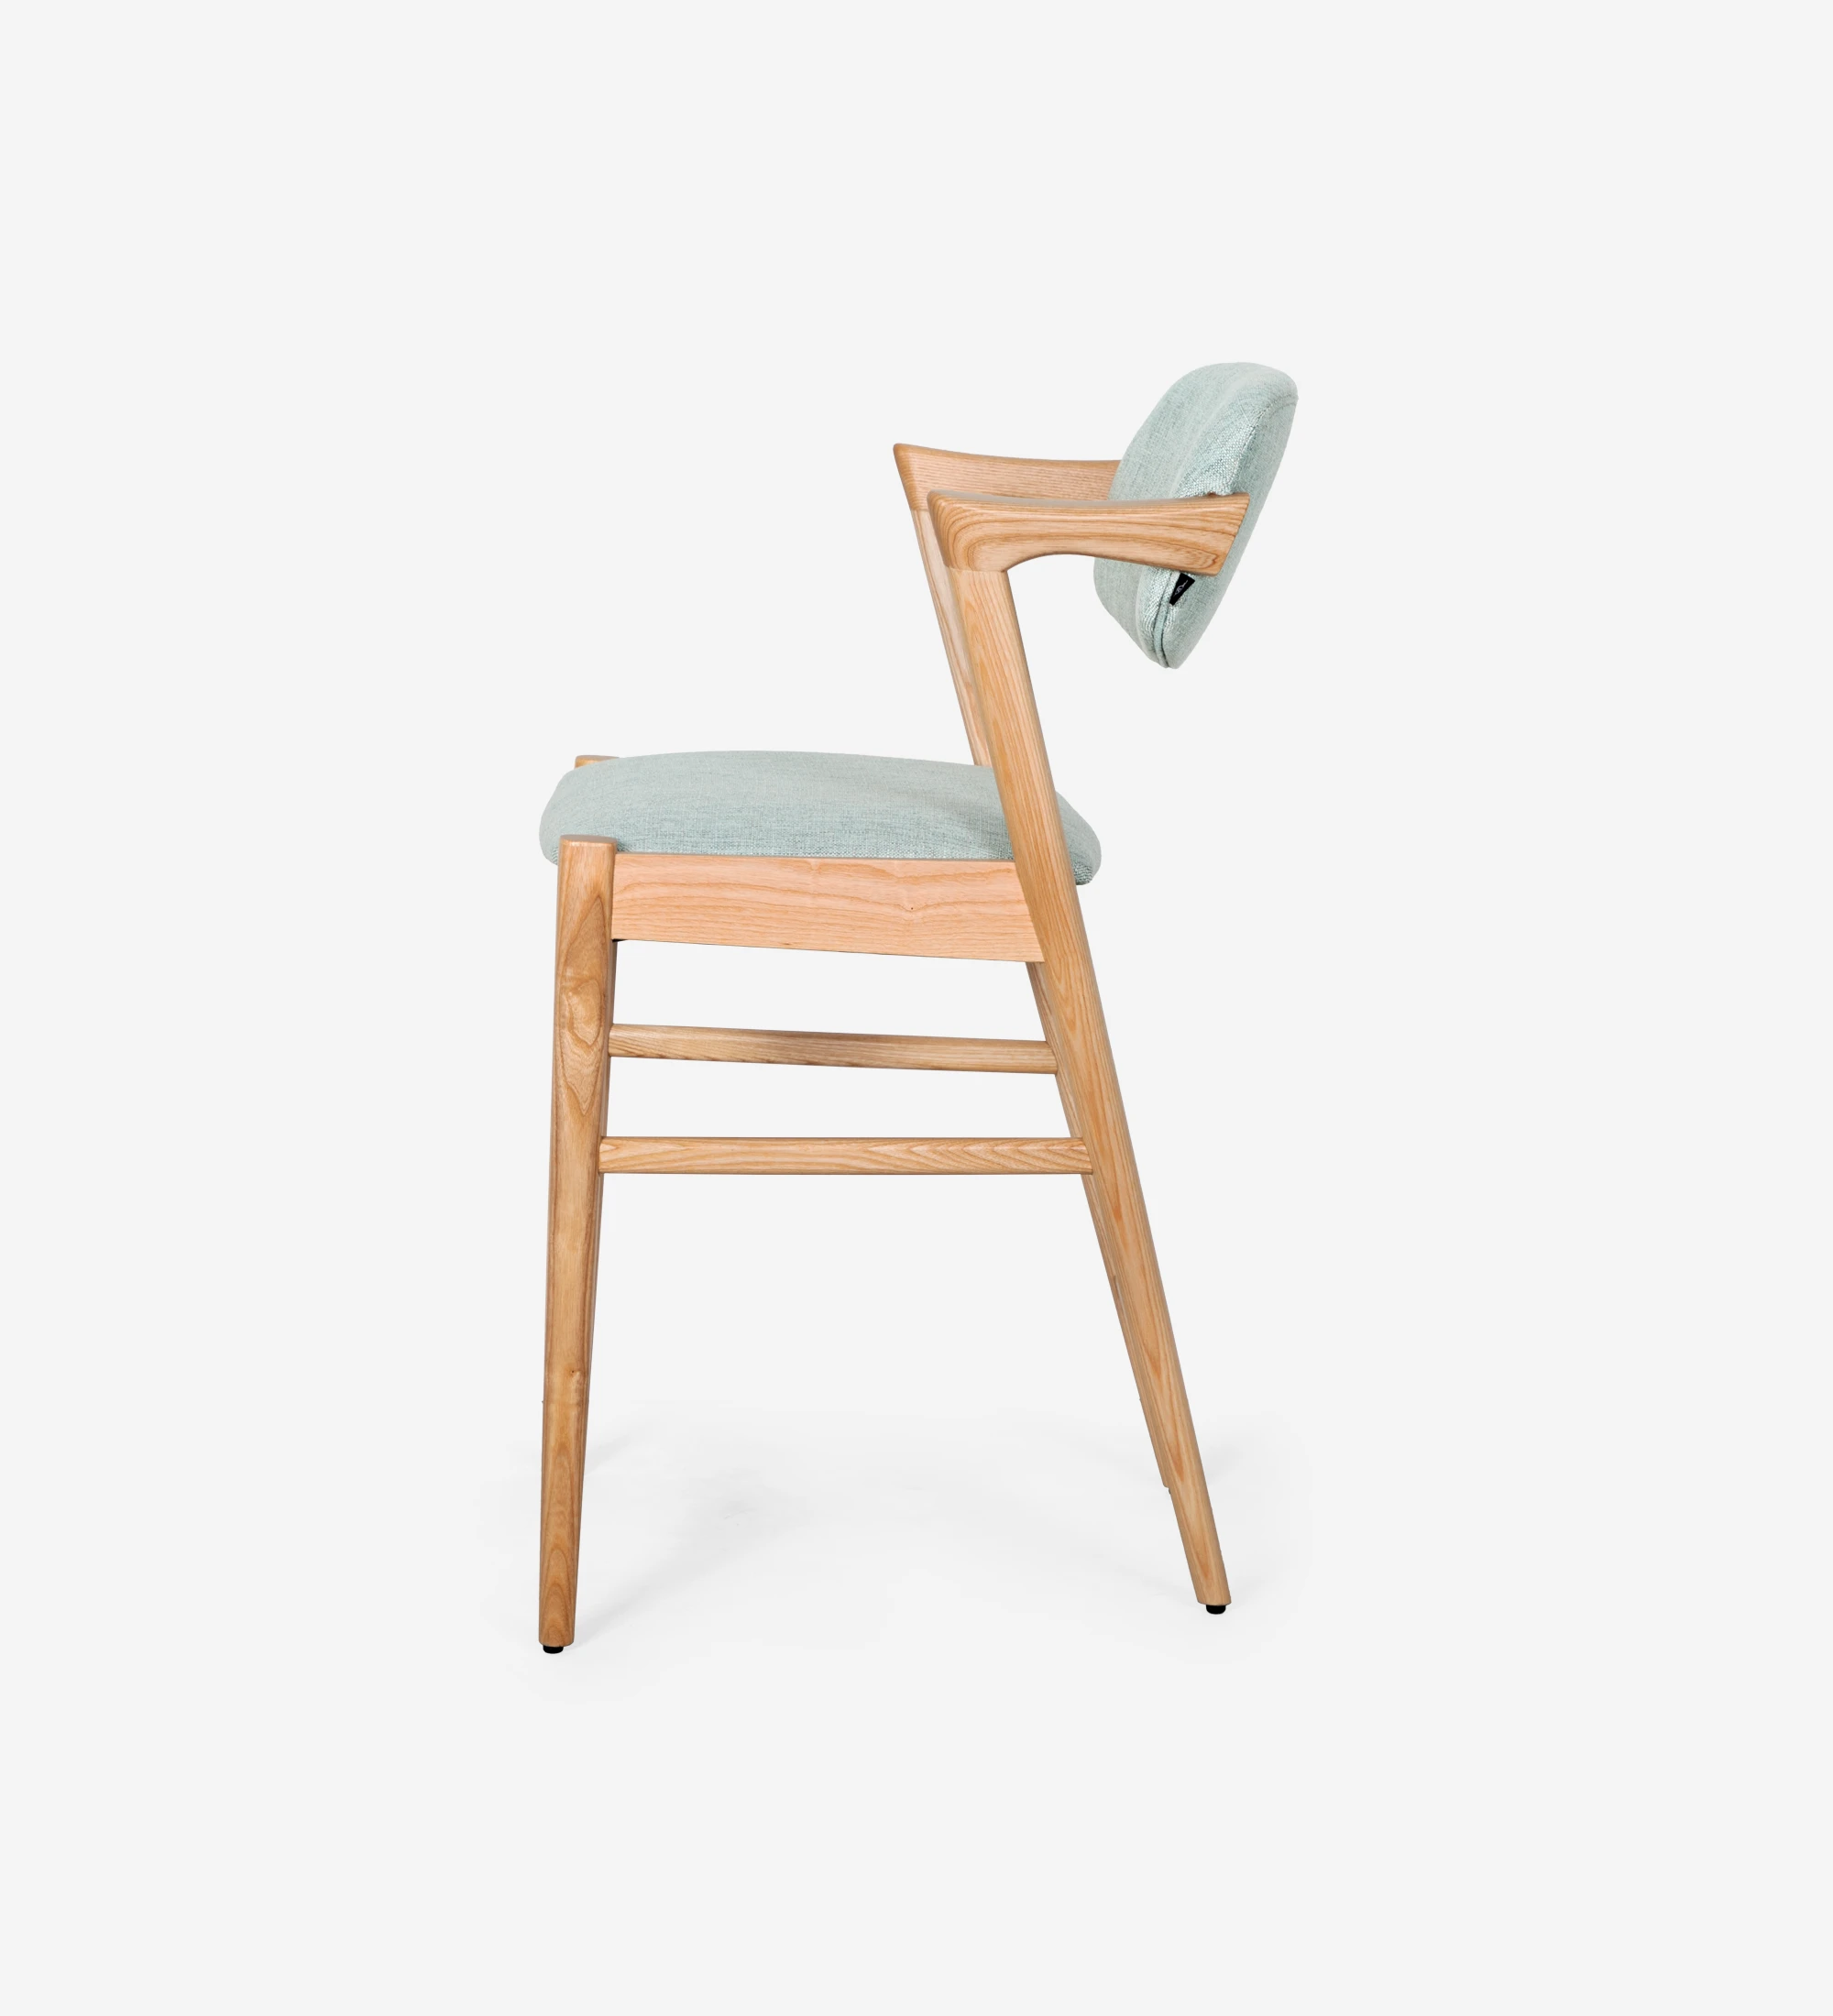 Stool in natural colored ash wood, with seat and back upholstered in fabric.